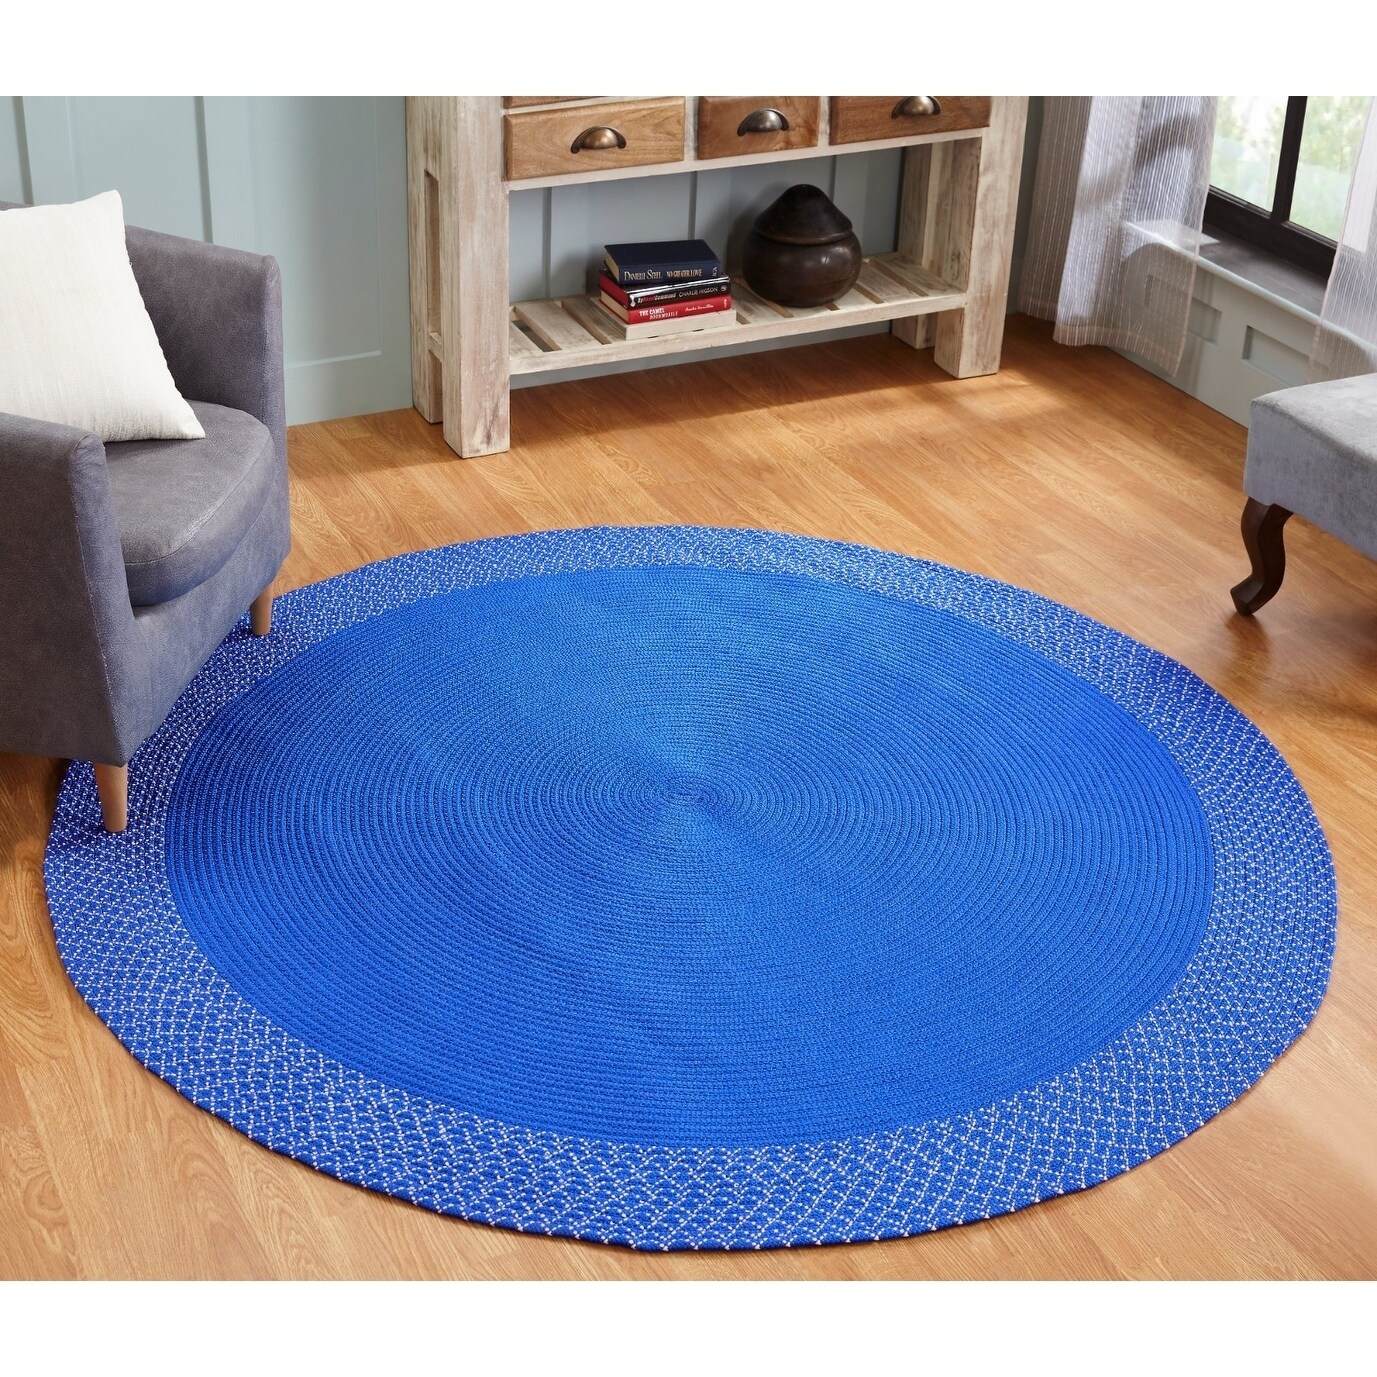 Indoor Outdoor Braided Rug 6X6 Square Blue | eBay